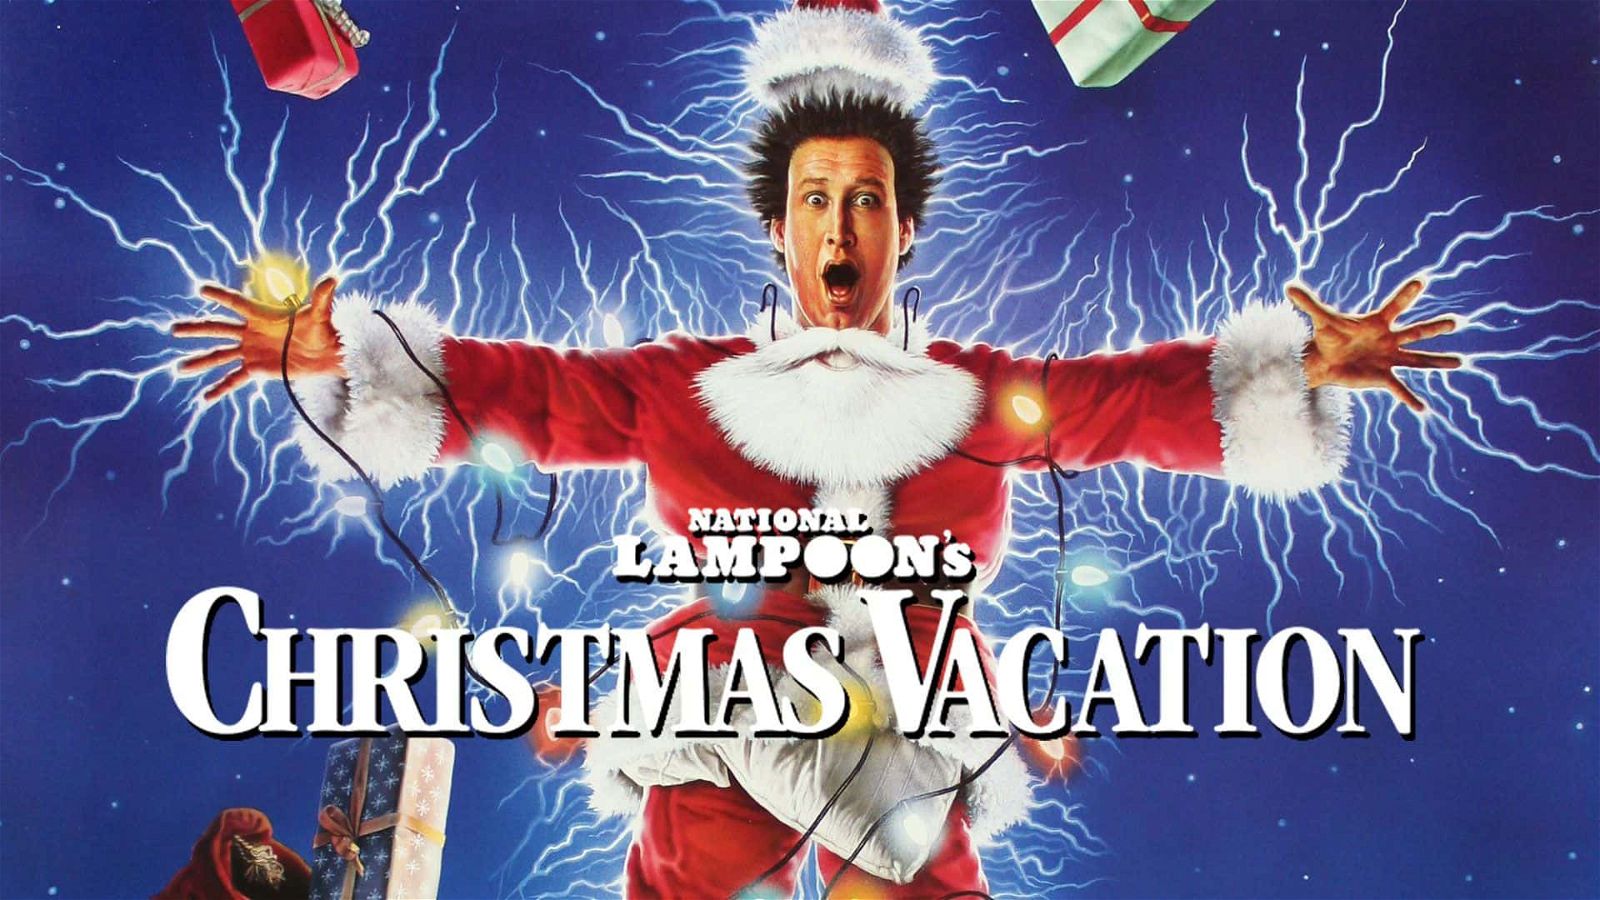 National Lampoon’s Christmas Vacation Costume Idea